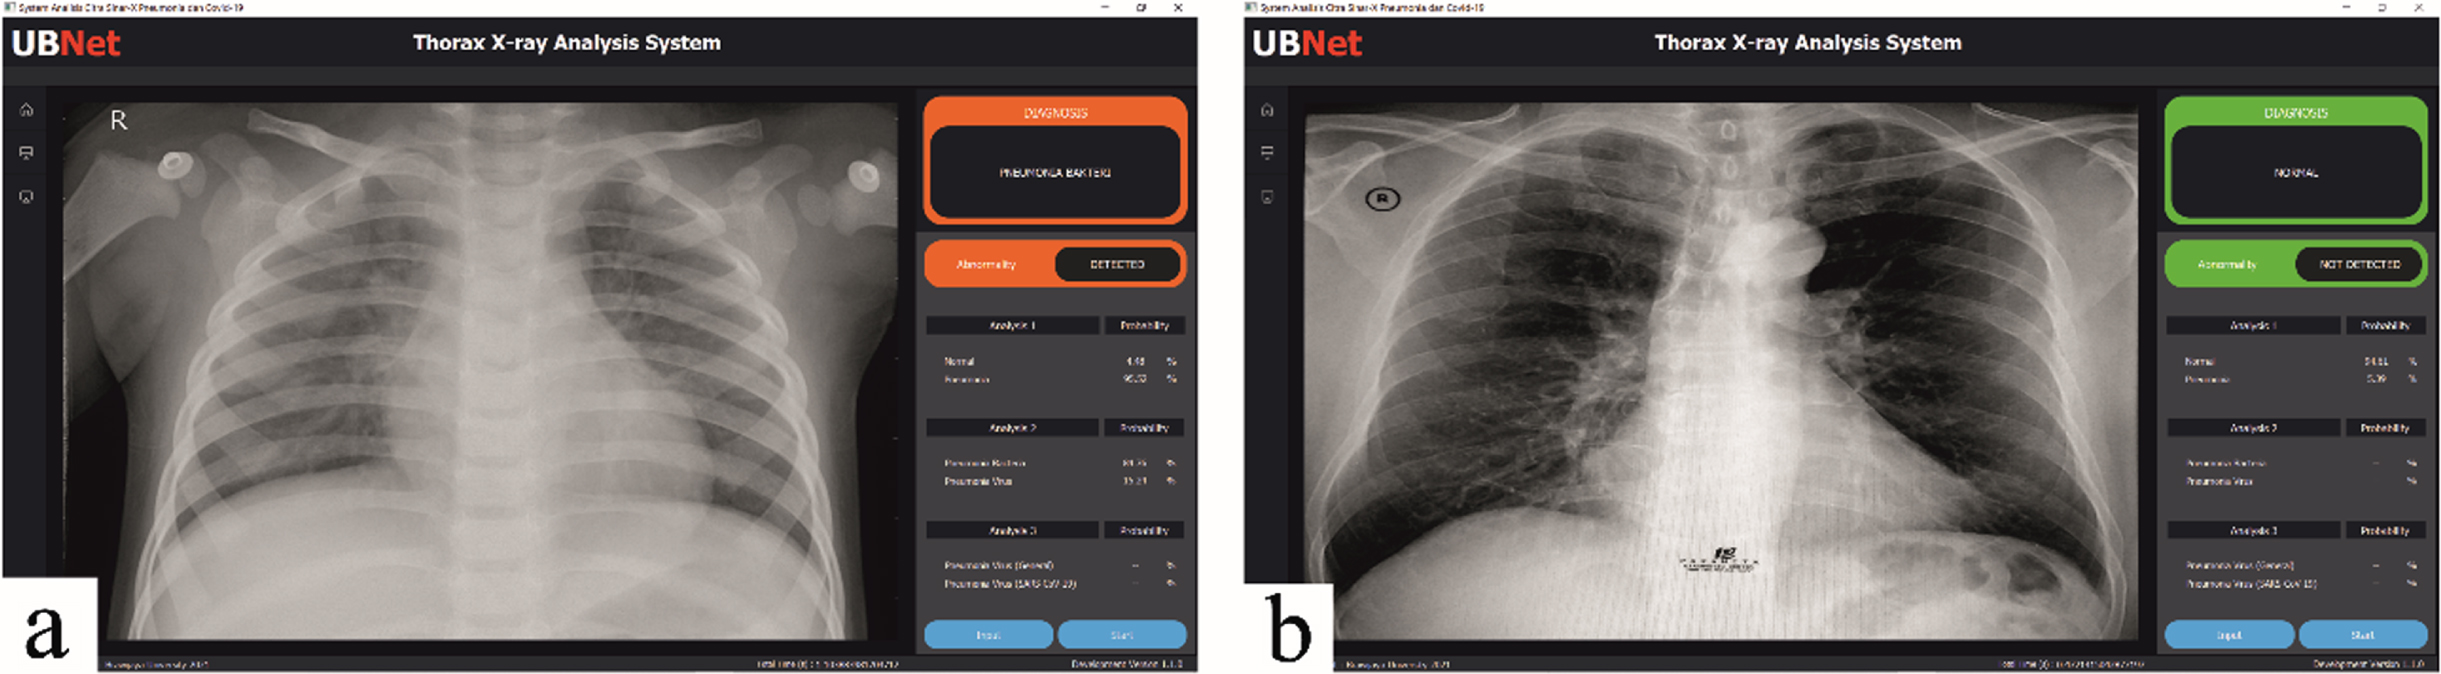 Trial of a GUI-based viewer system to analyze images of patients with (a) bacterial pneumonia and (b) normal.